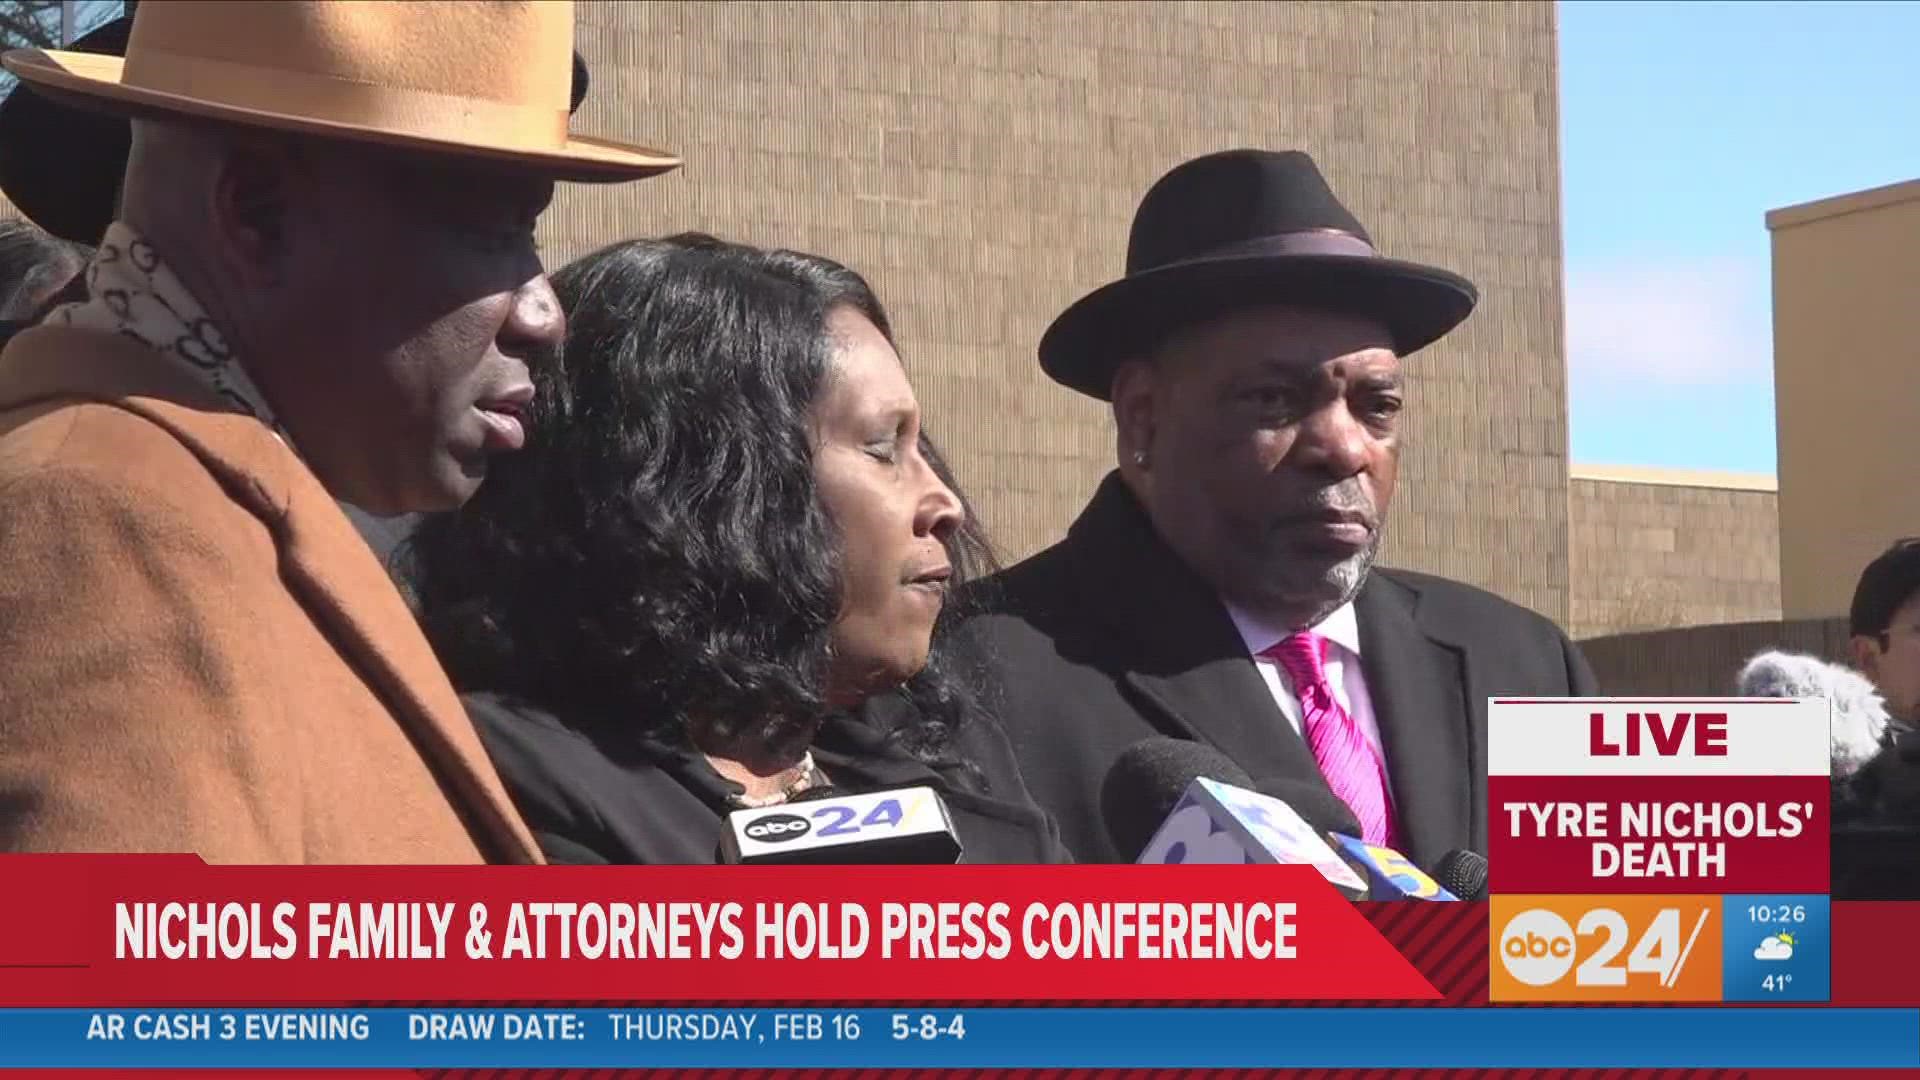 Tyre Nichols' family and their attorneys spoke Friday morning after the five fired MPD officers charged in his death made their first court appearance.